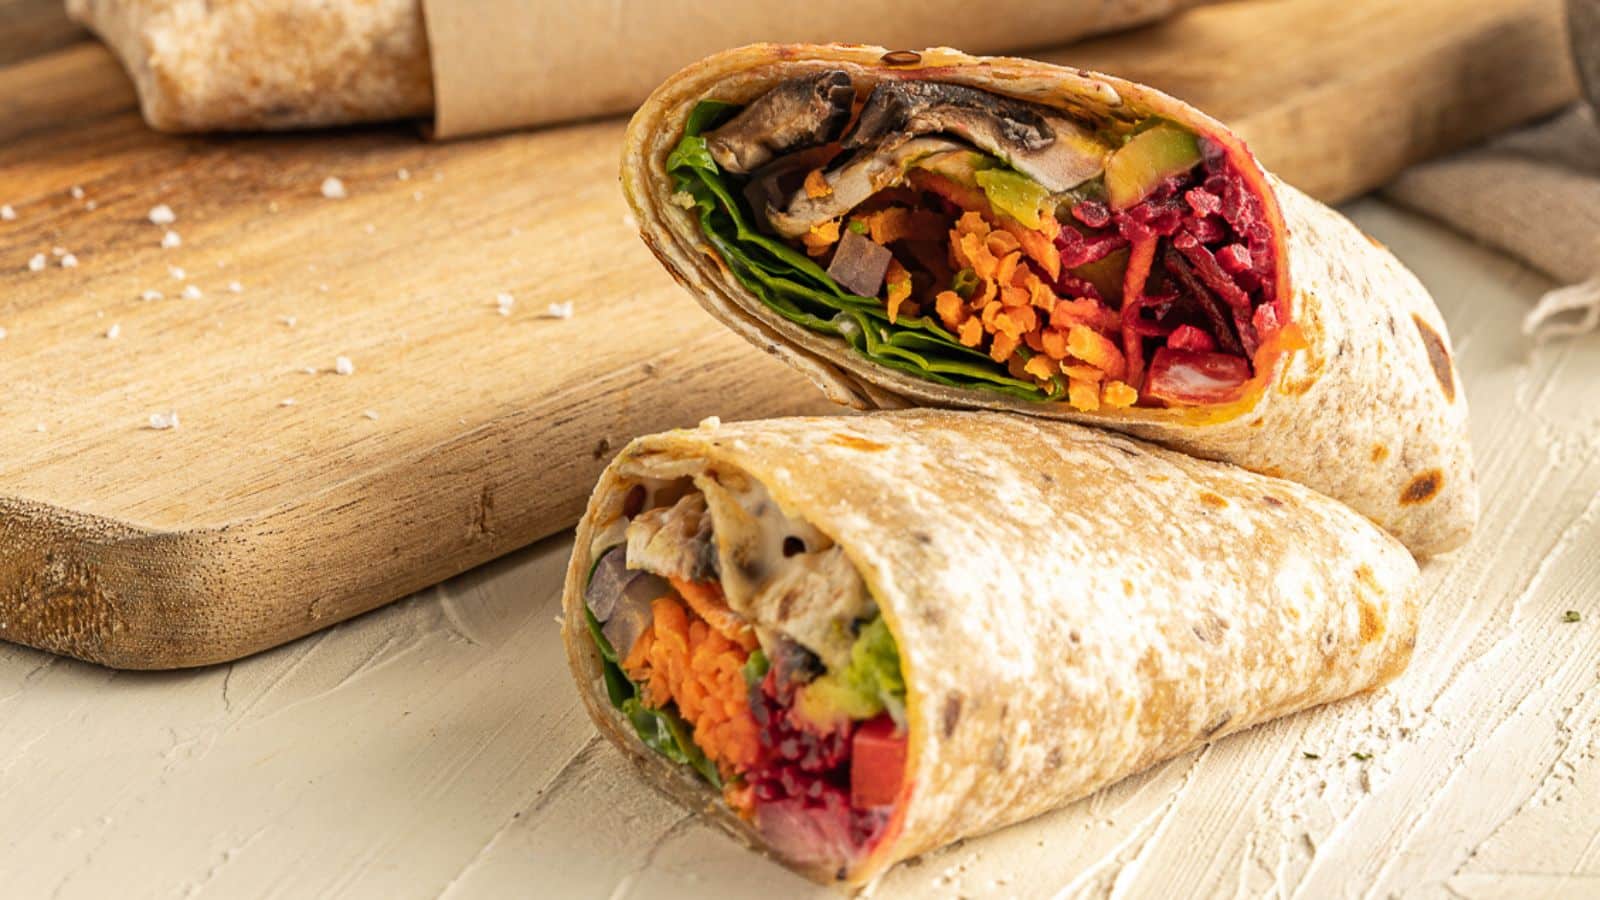 <p>This Veggie Wrap isn’t your average one thanks to the hummus used as a dressing. It is an unconventional use that adds a different level of flavor, making this wrap exceptionally scrumptious. You’ll be smitten!<br><strong>Get the Recipe: </strong><a href="https://twocityvegans.com/easy-vegan-veggie-wrap/?utm_source=msn&utm_medium=page&utm_campaign=msn" rel="noopener">Easy Vegan Veggie Wrap</a></p>